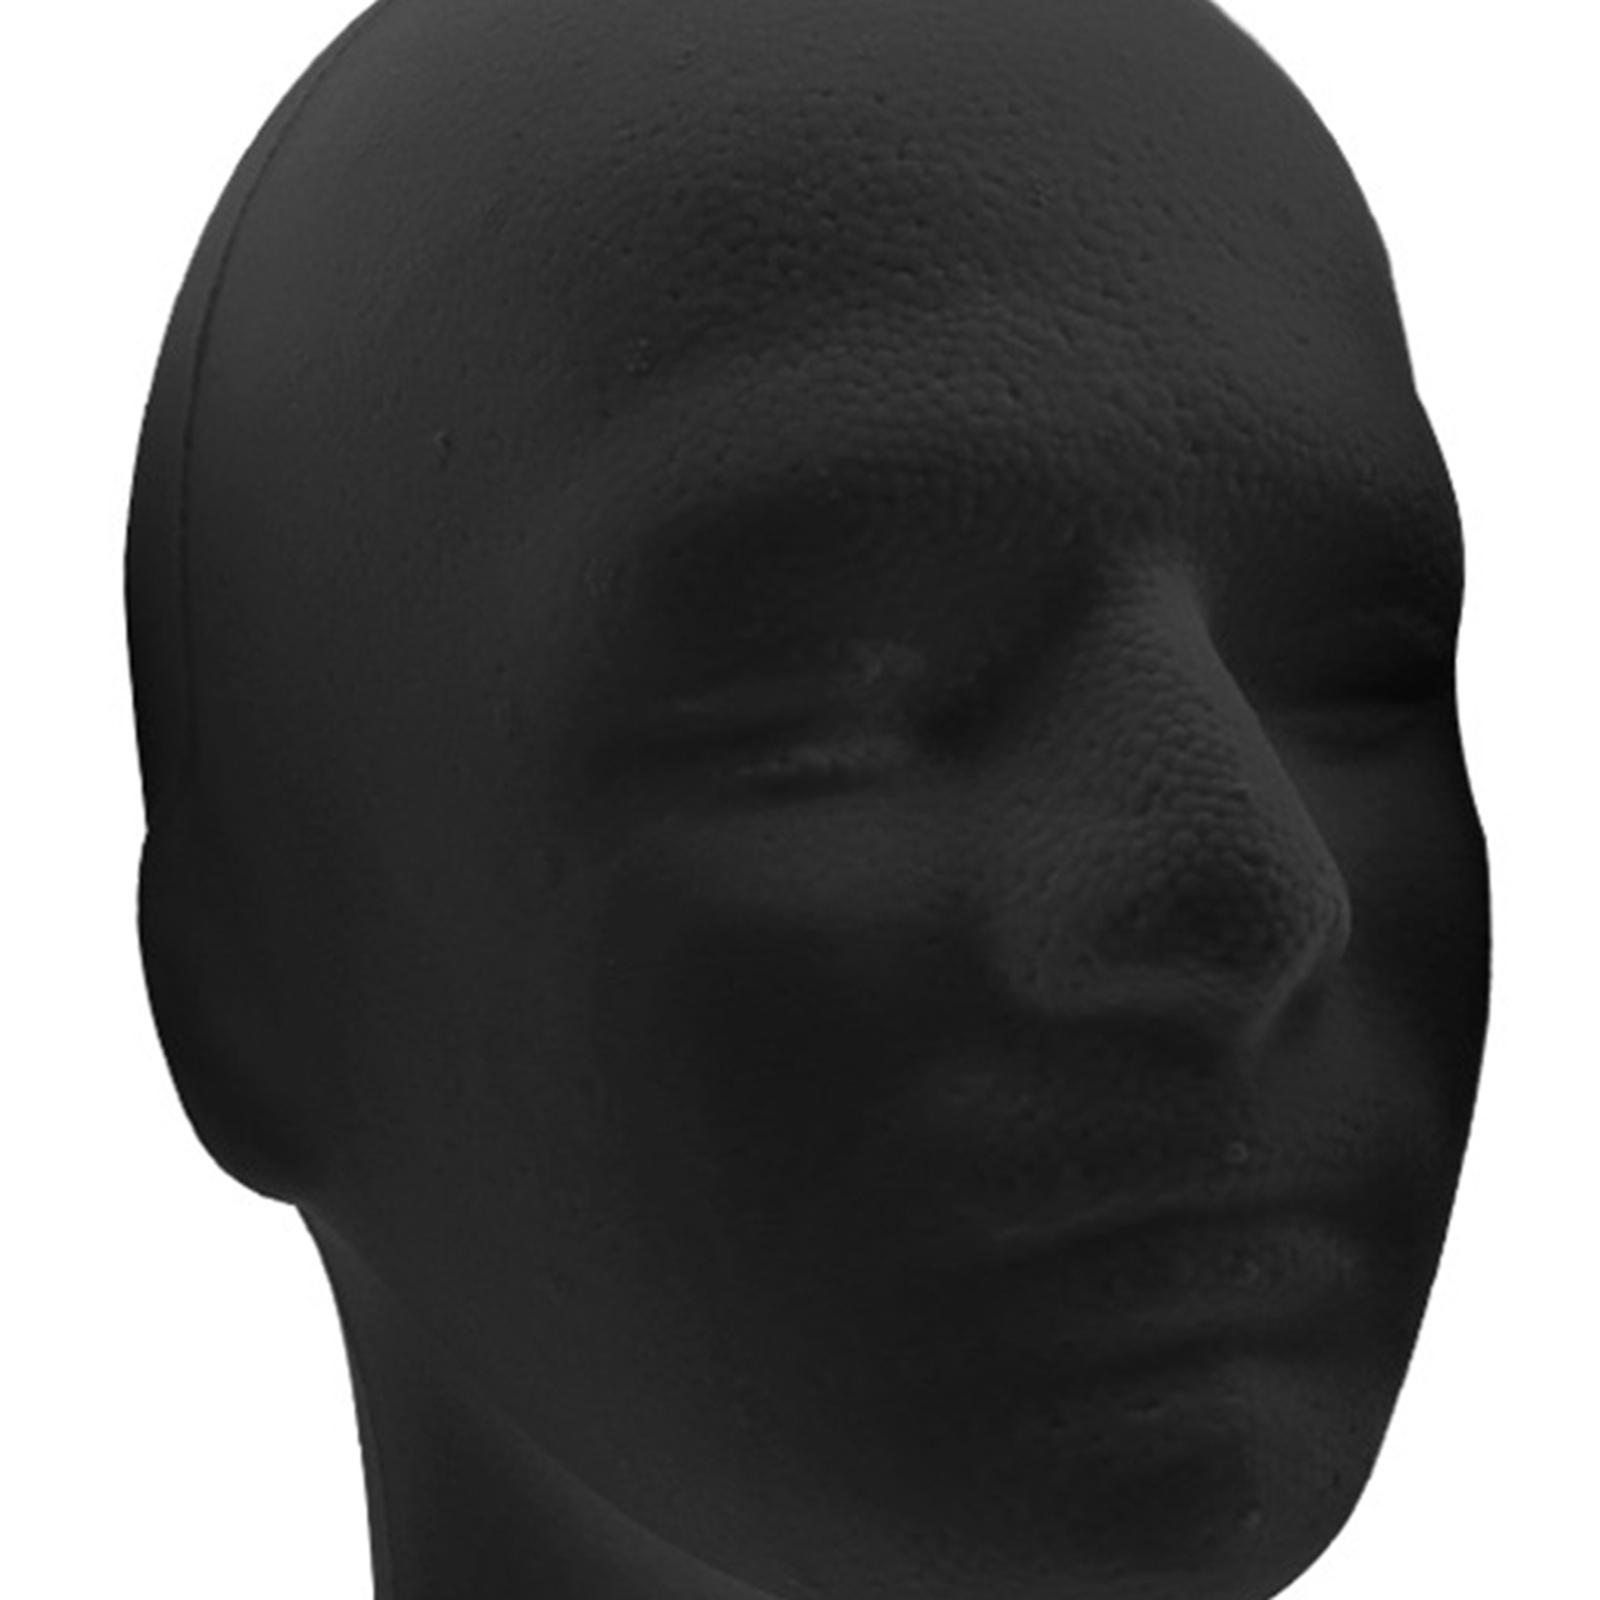 Man'S Head Display Stand Male Stand Model Foam Stable Black Sturdy Round Base Mannequin Head Display Stand for Display Headwear Styling